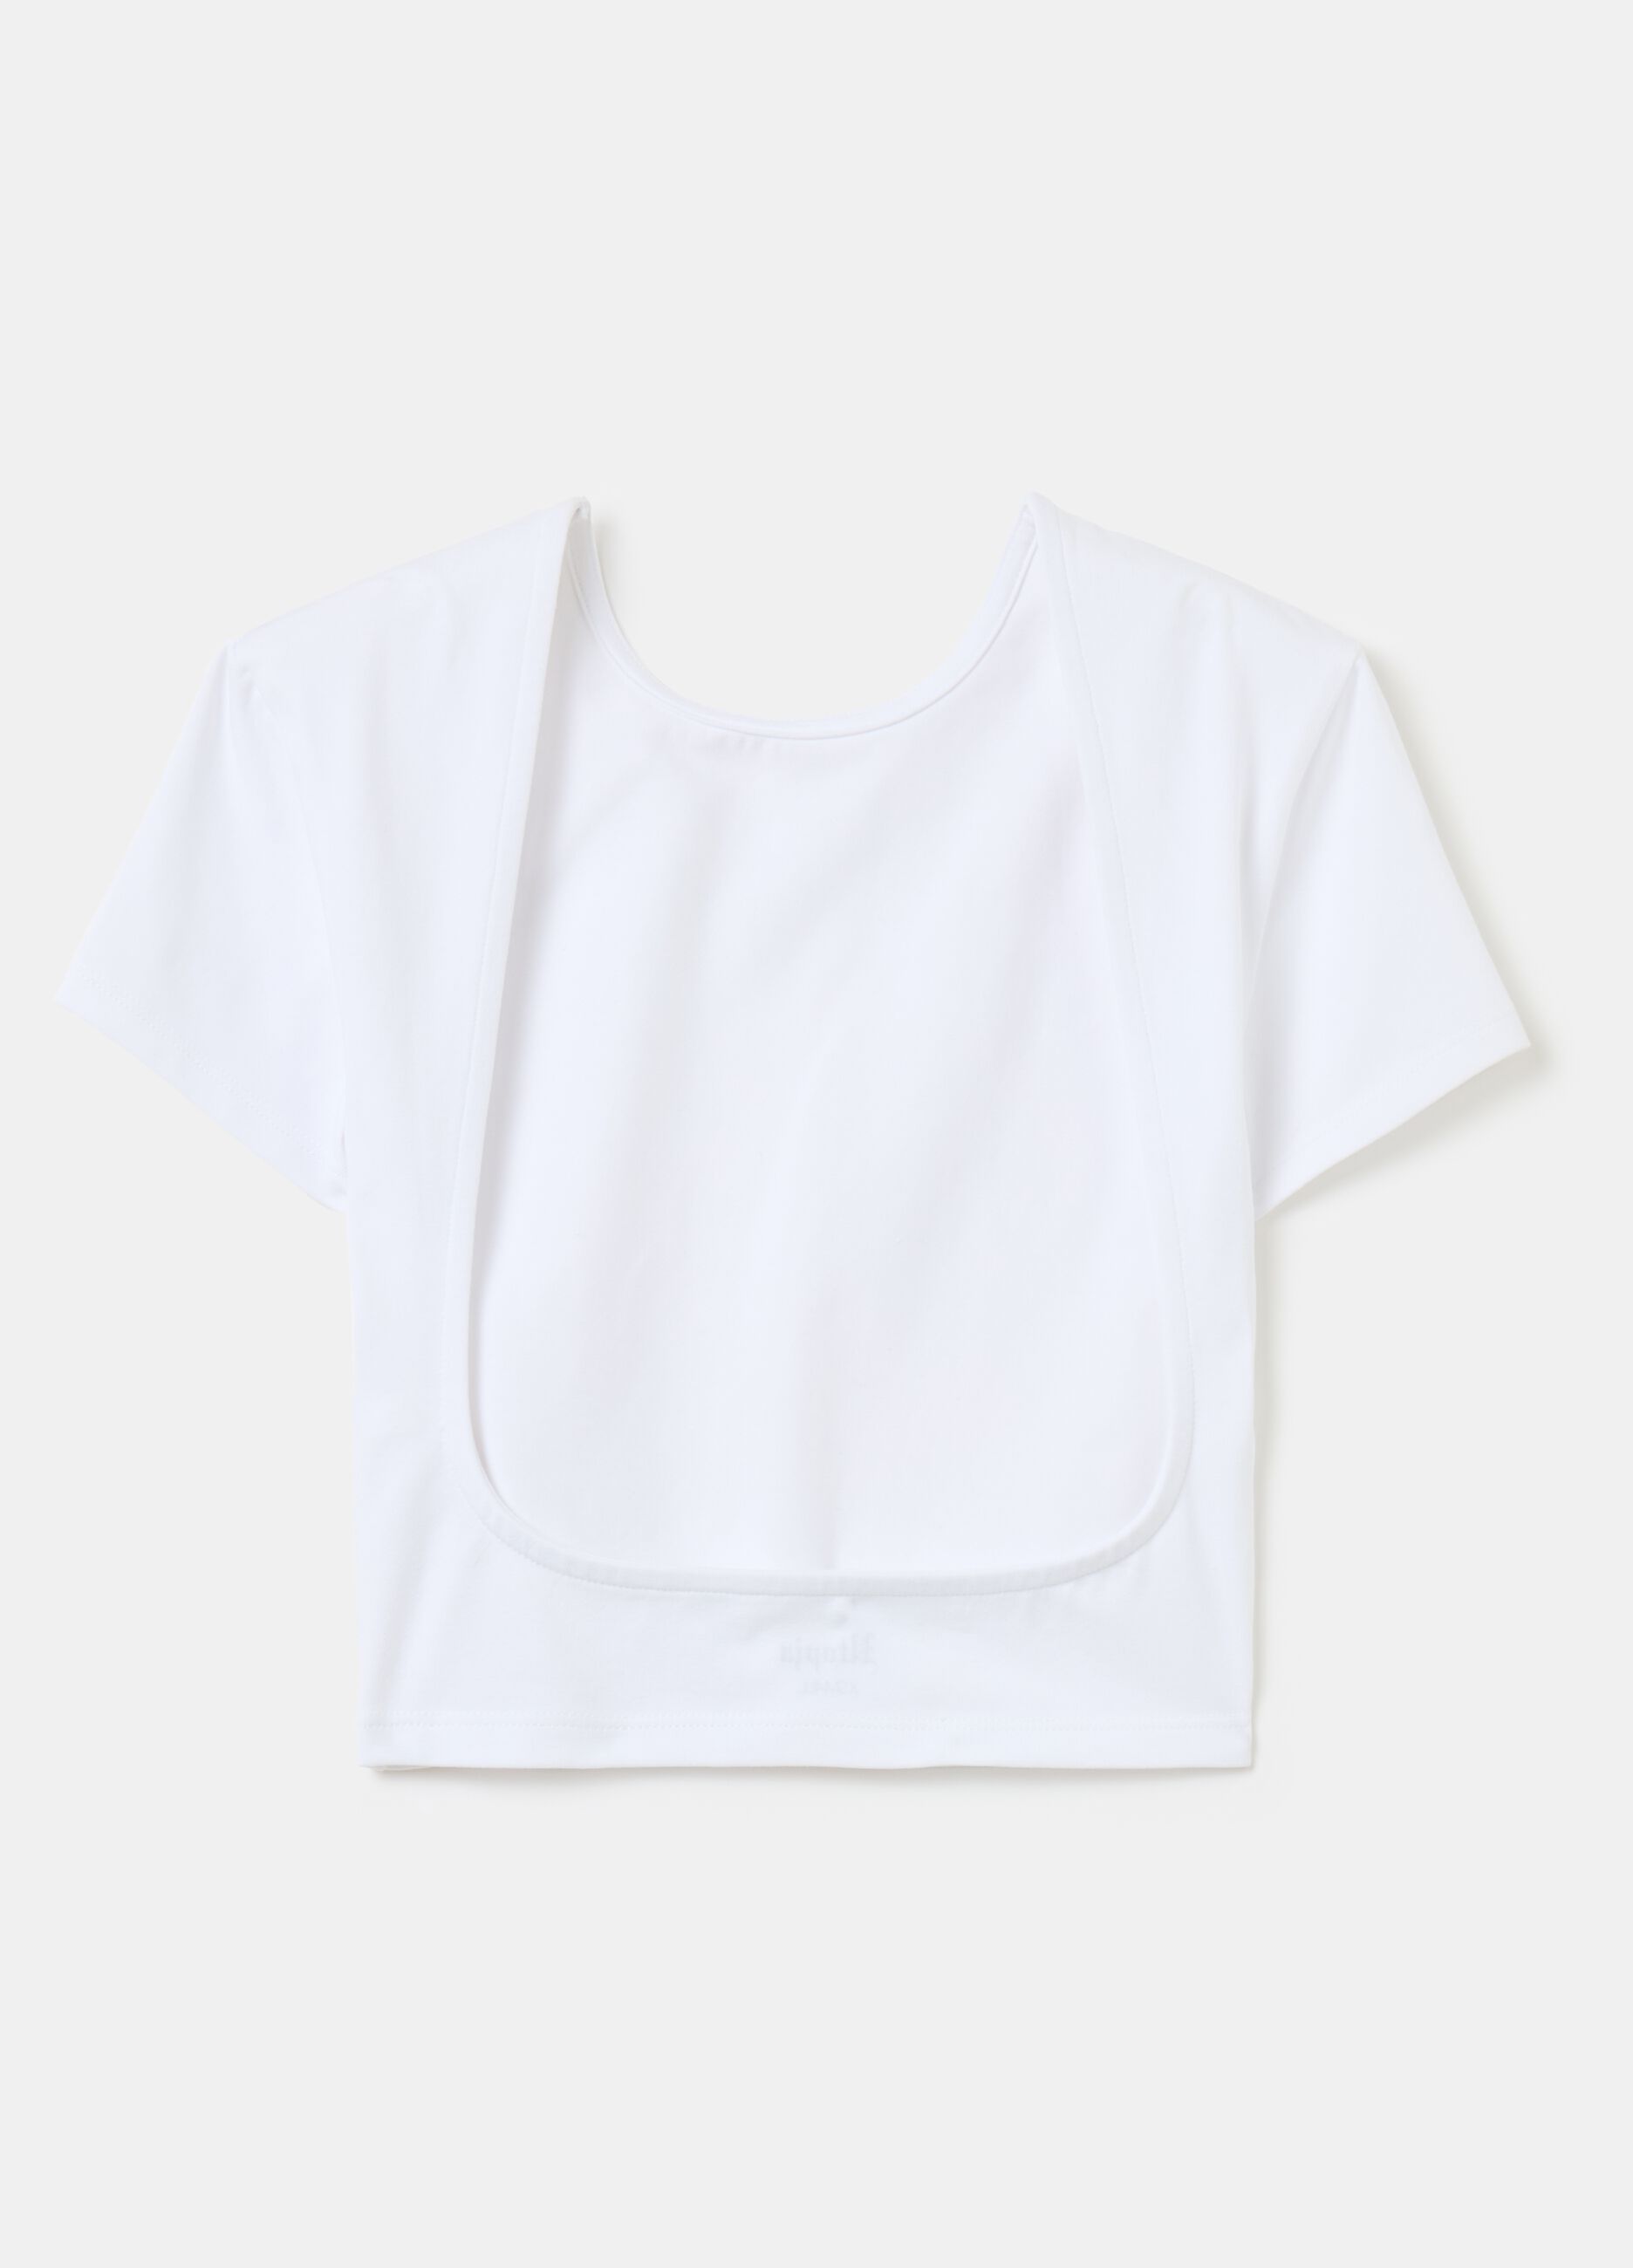 Backless T-shirt Crop White